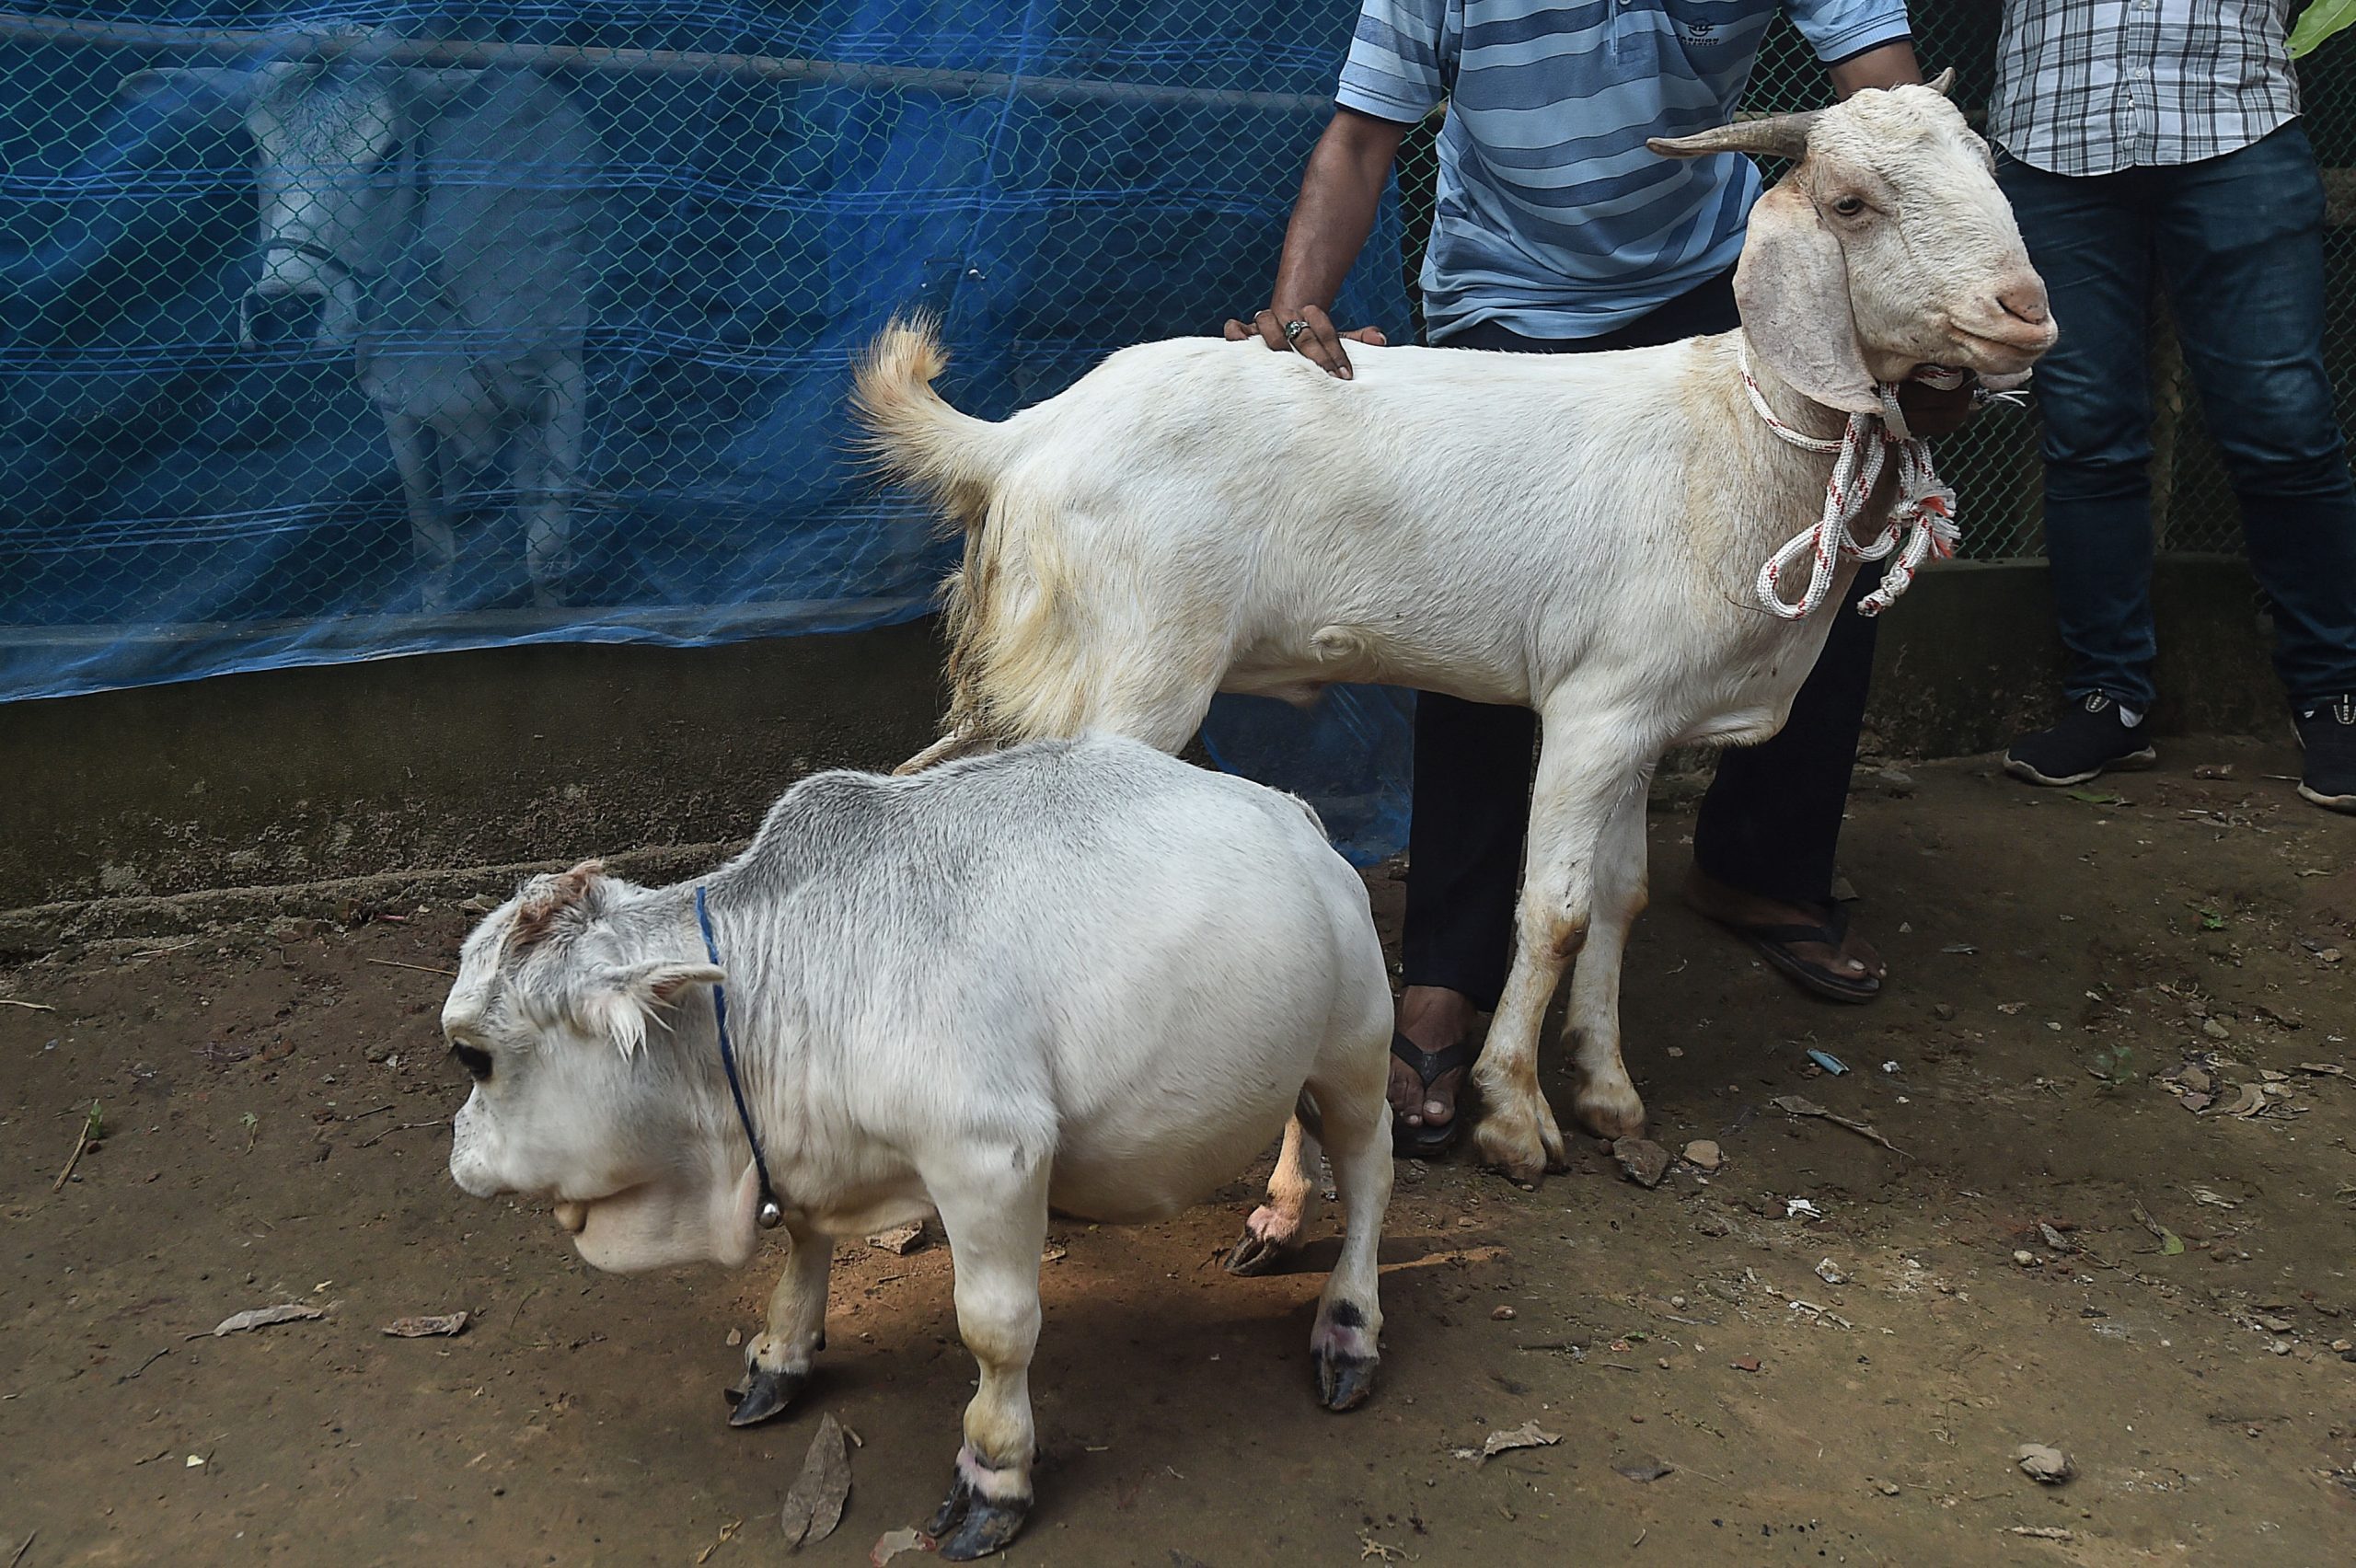 Bangladeshis defy COVID norms to see Rani, a dwarf cow